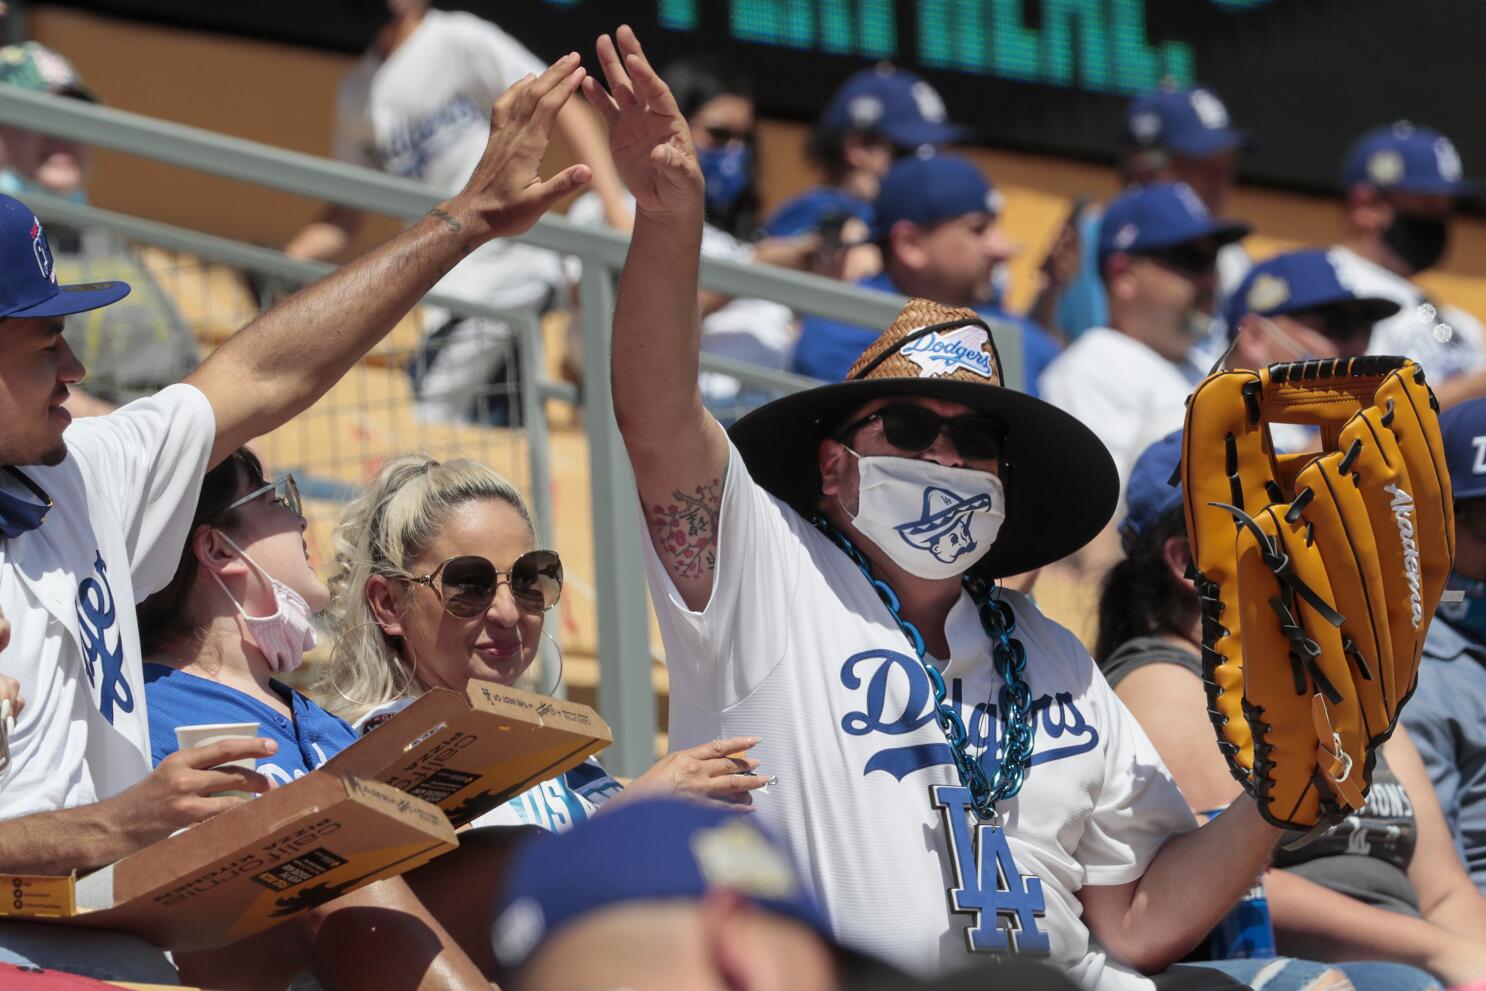 6) Dodgers and Lakers fans asked to quarantine in Los Angeles